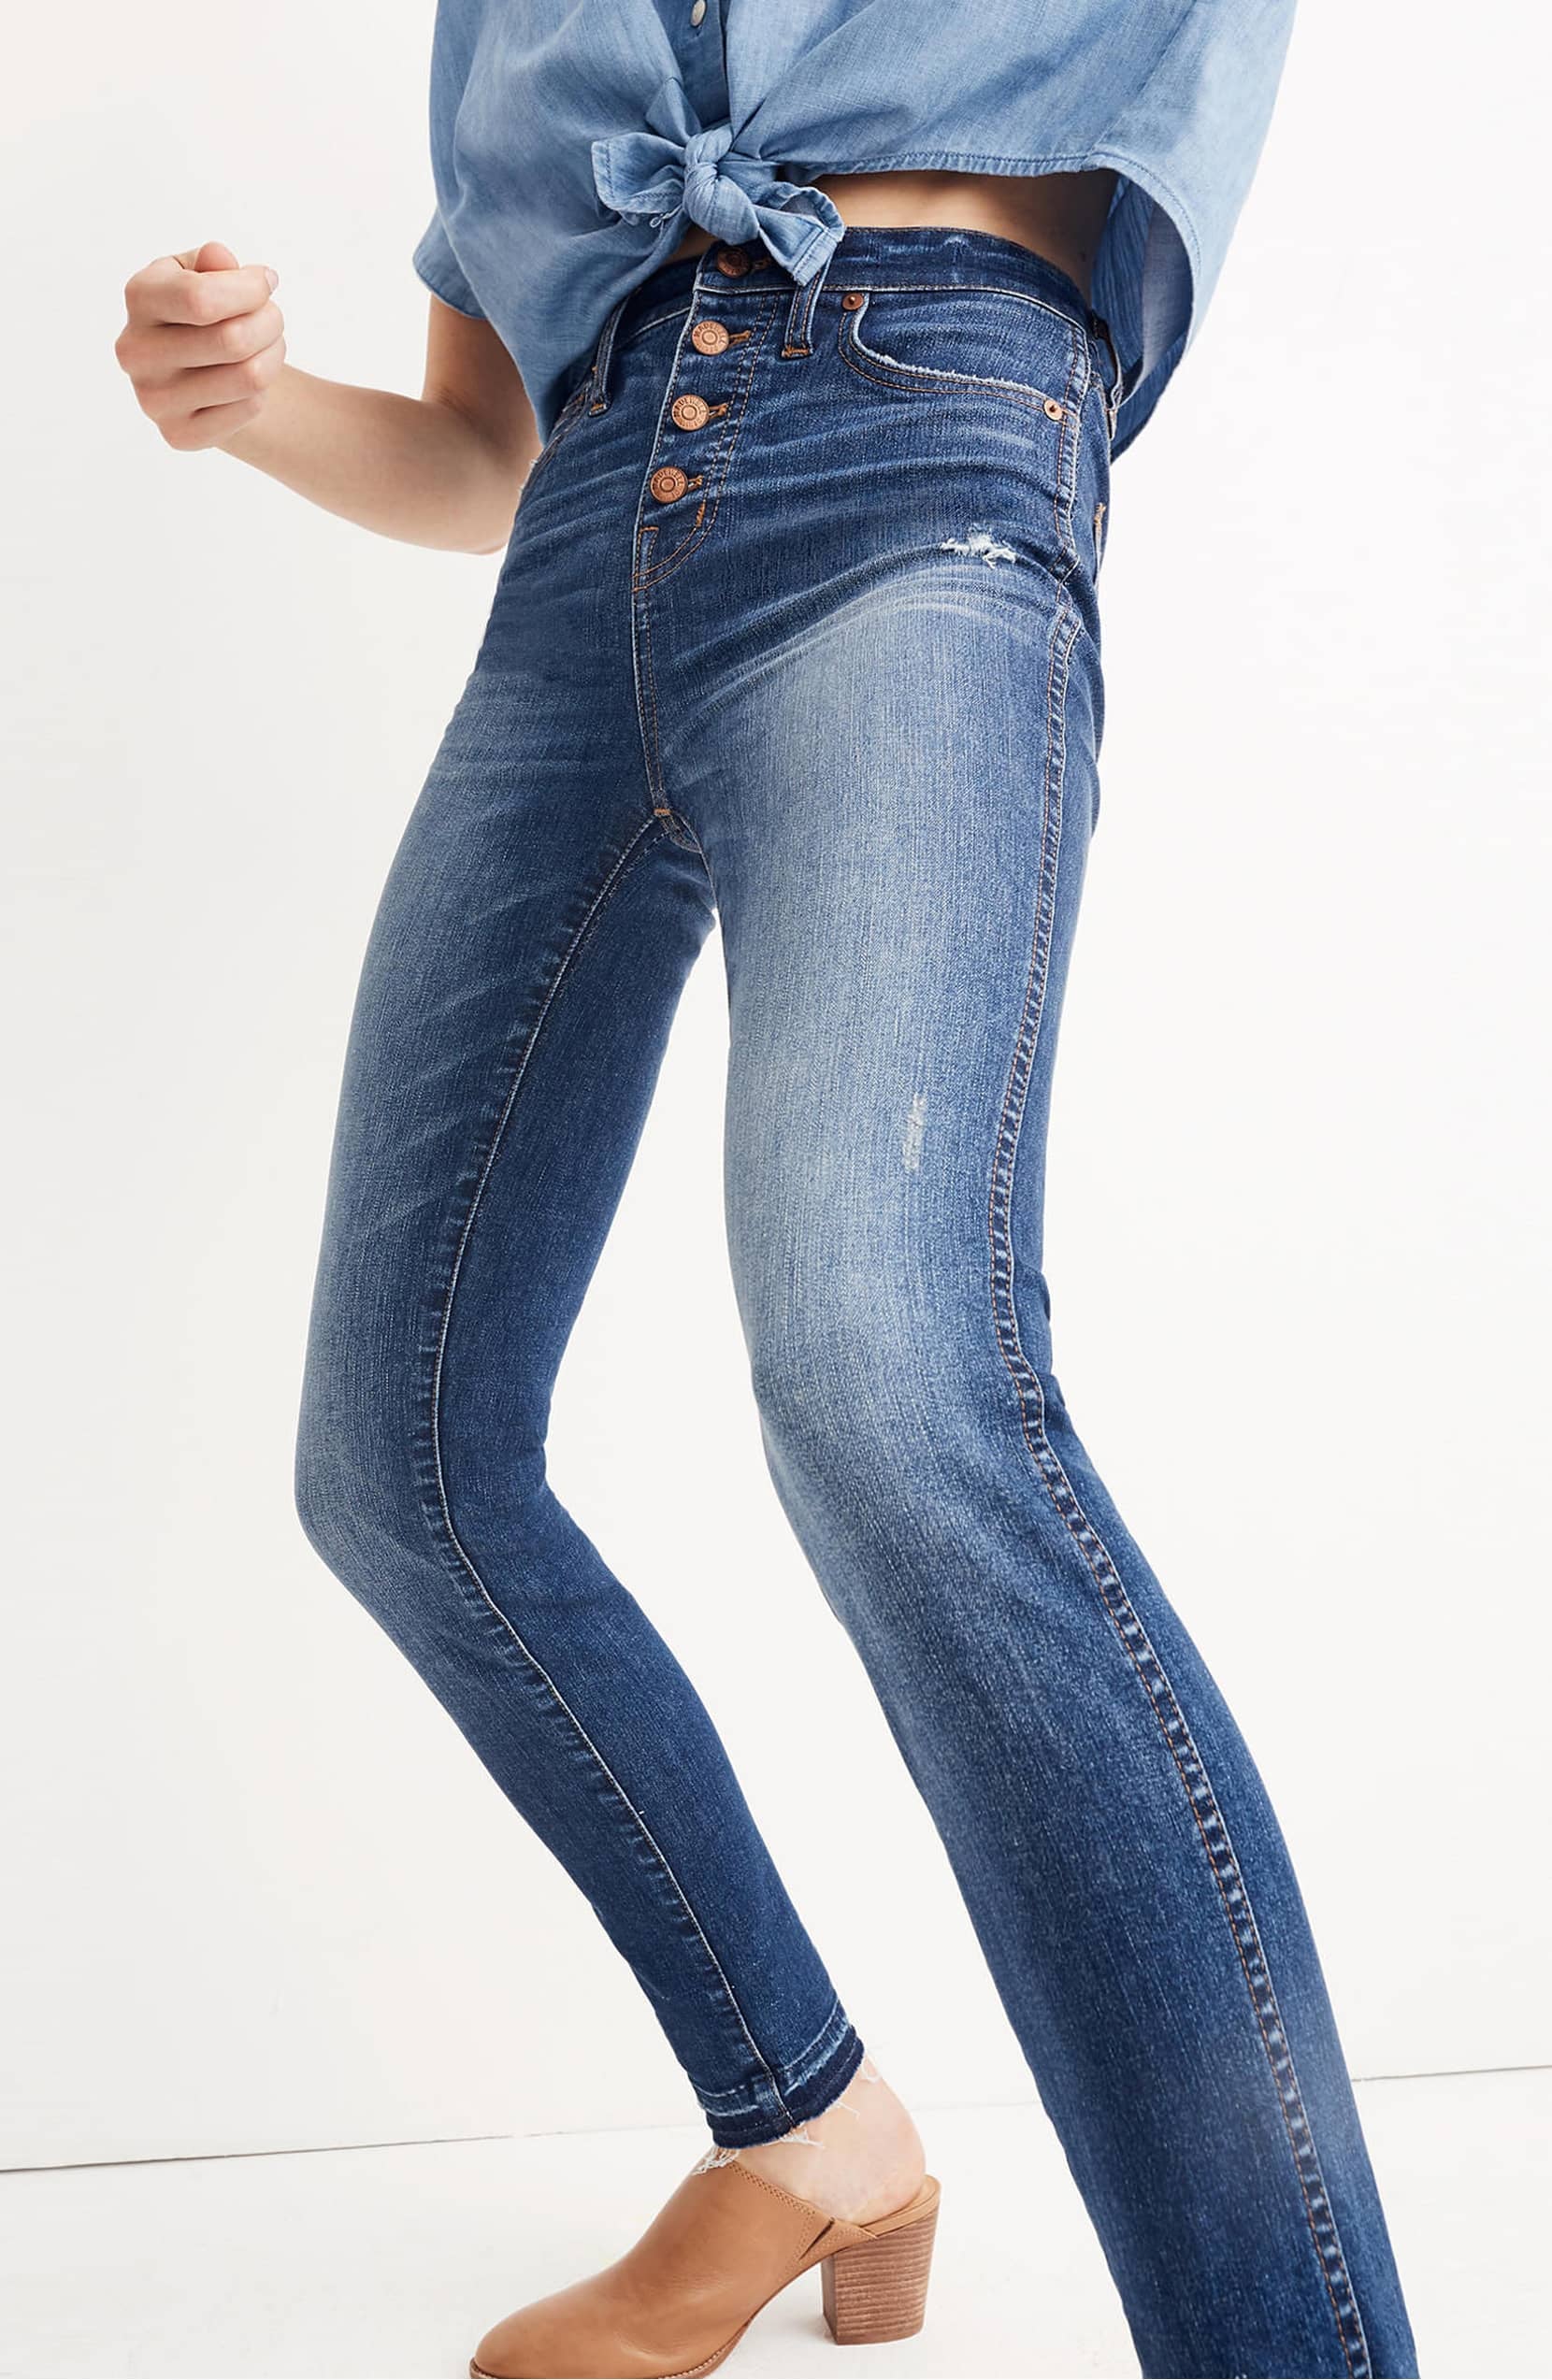 best women's jeans for tall